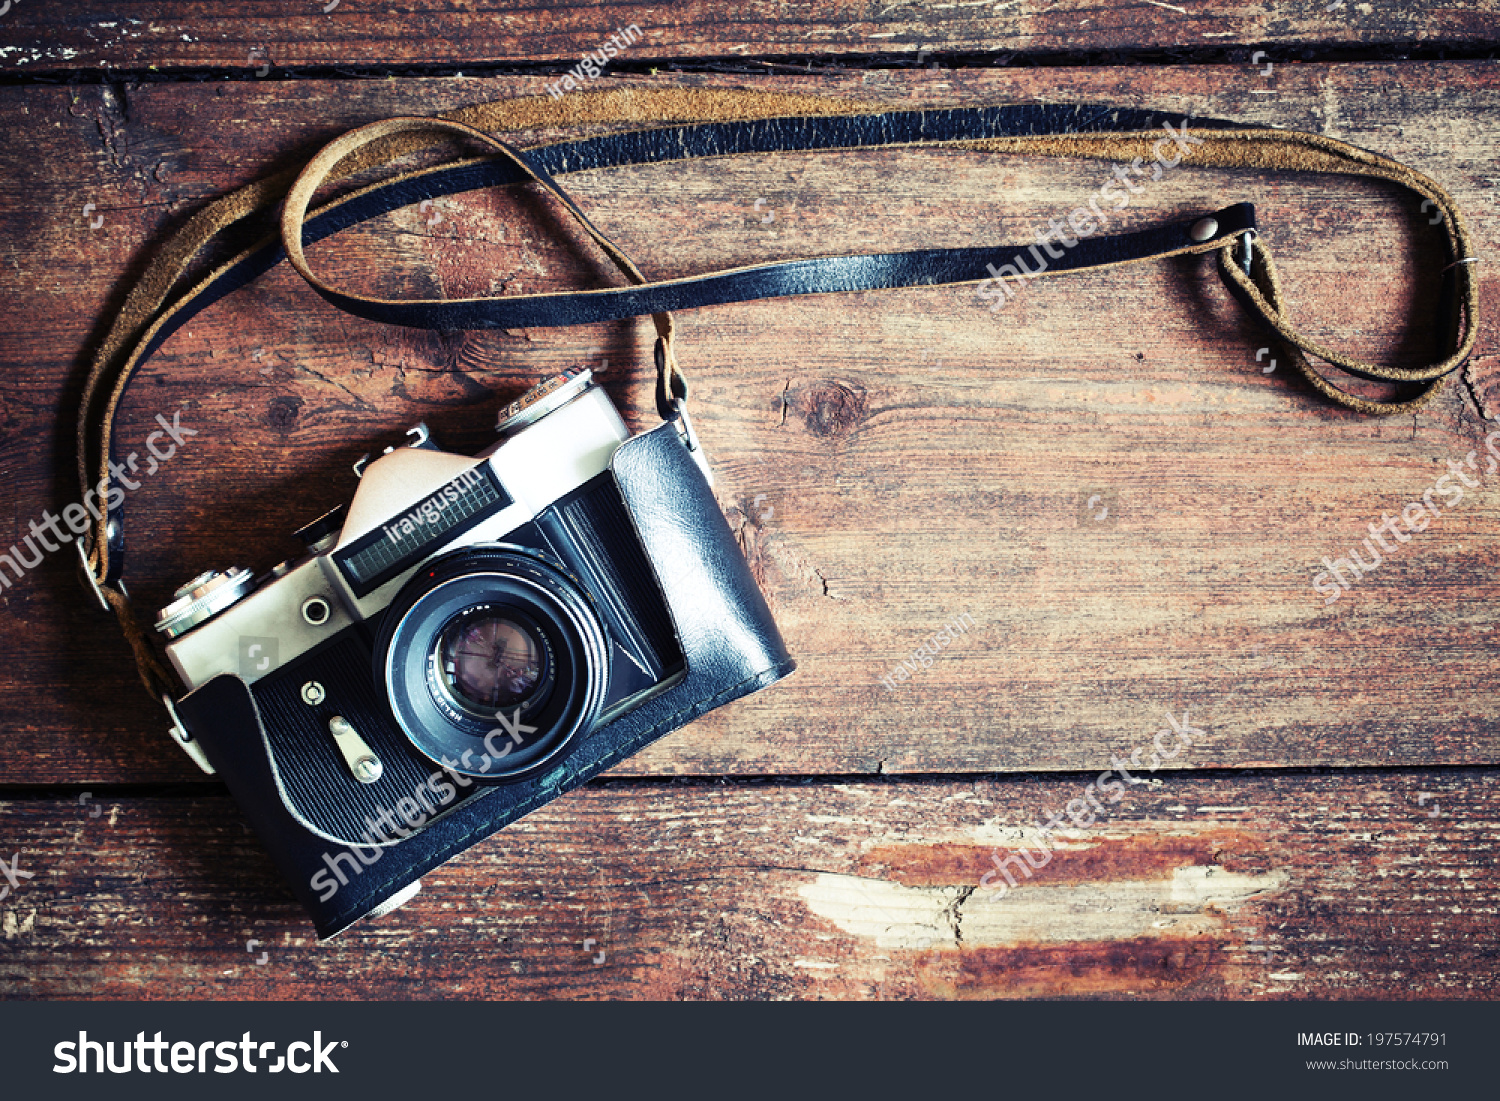 Old retro camera on vintage wooden boards abstract background #197574791